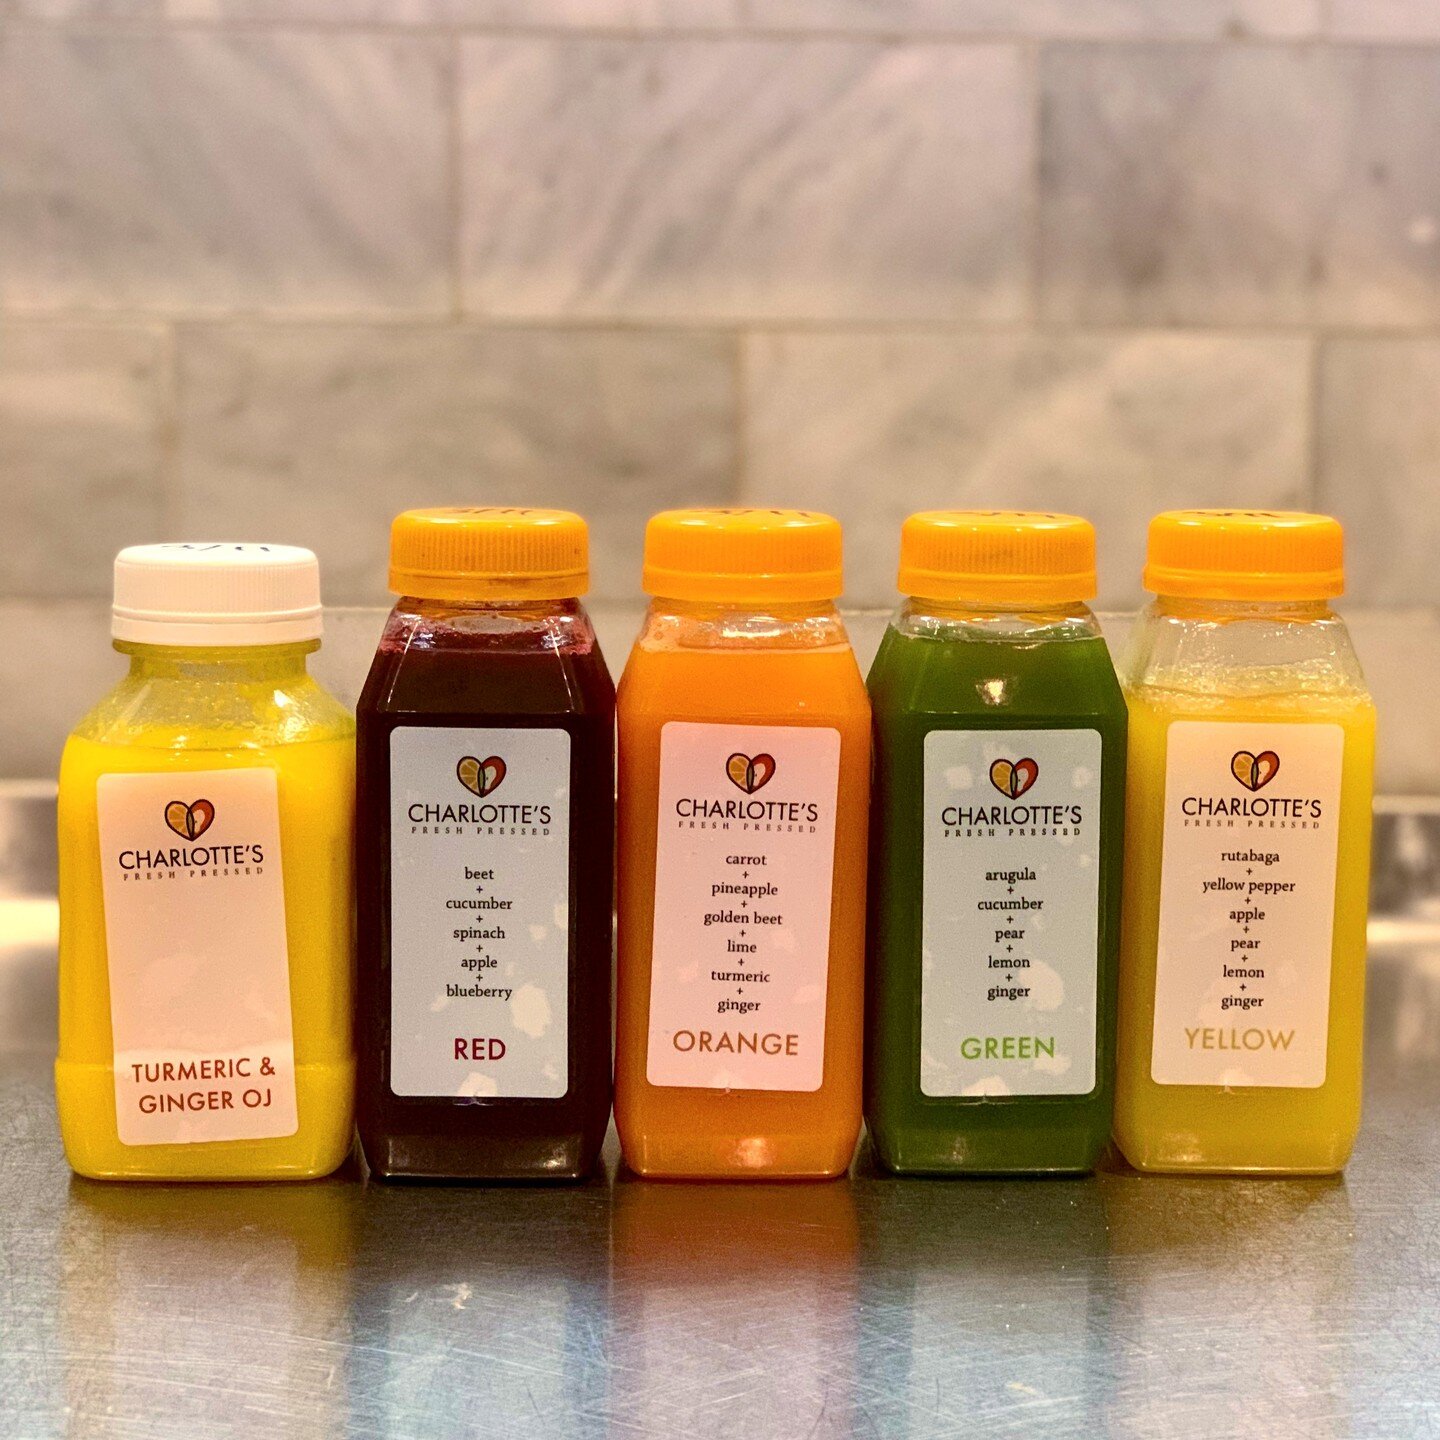 Have you ever tried Charlotte's Fresh Pressed Juices? Available daily at our Fairmount location and locally made! Grab one in store or order ahead online
_______________________________________

Turmeric &amp; Ginger OJ
 
Red: Beet, Cucumber, Spinach